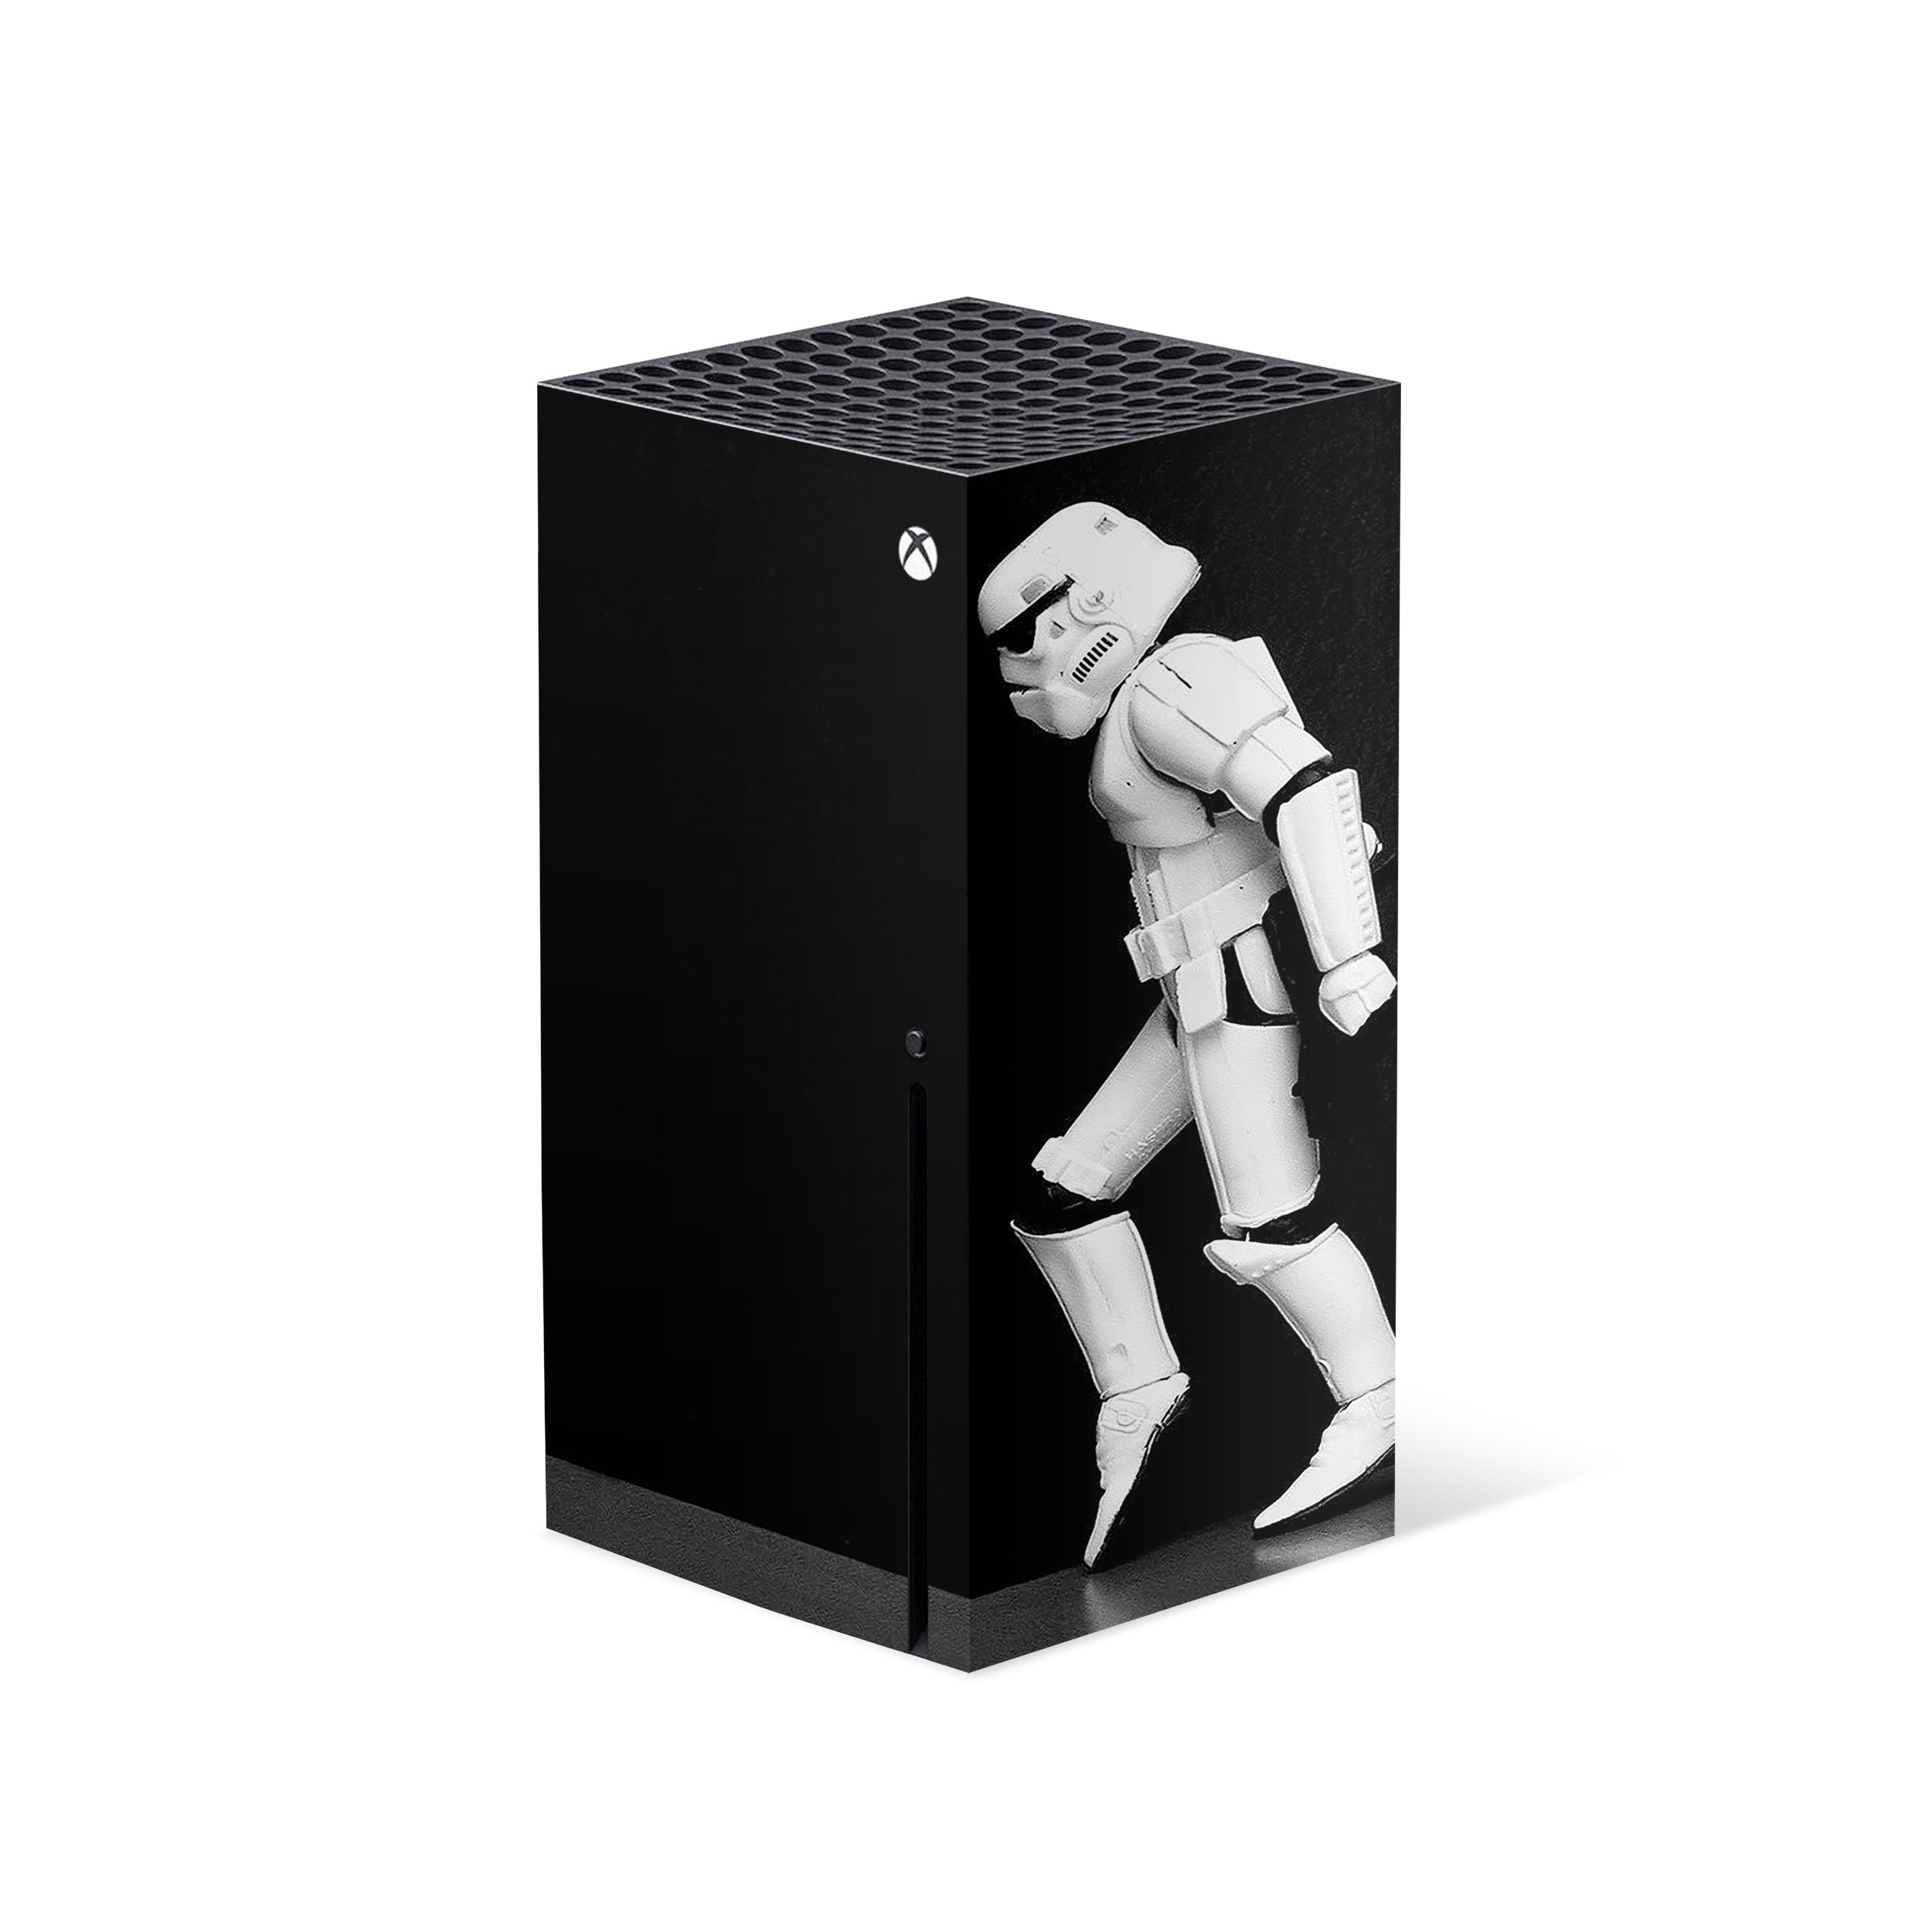 A video game skin featuring a Star Wars Storm Trooper design for the Xbox Series X.